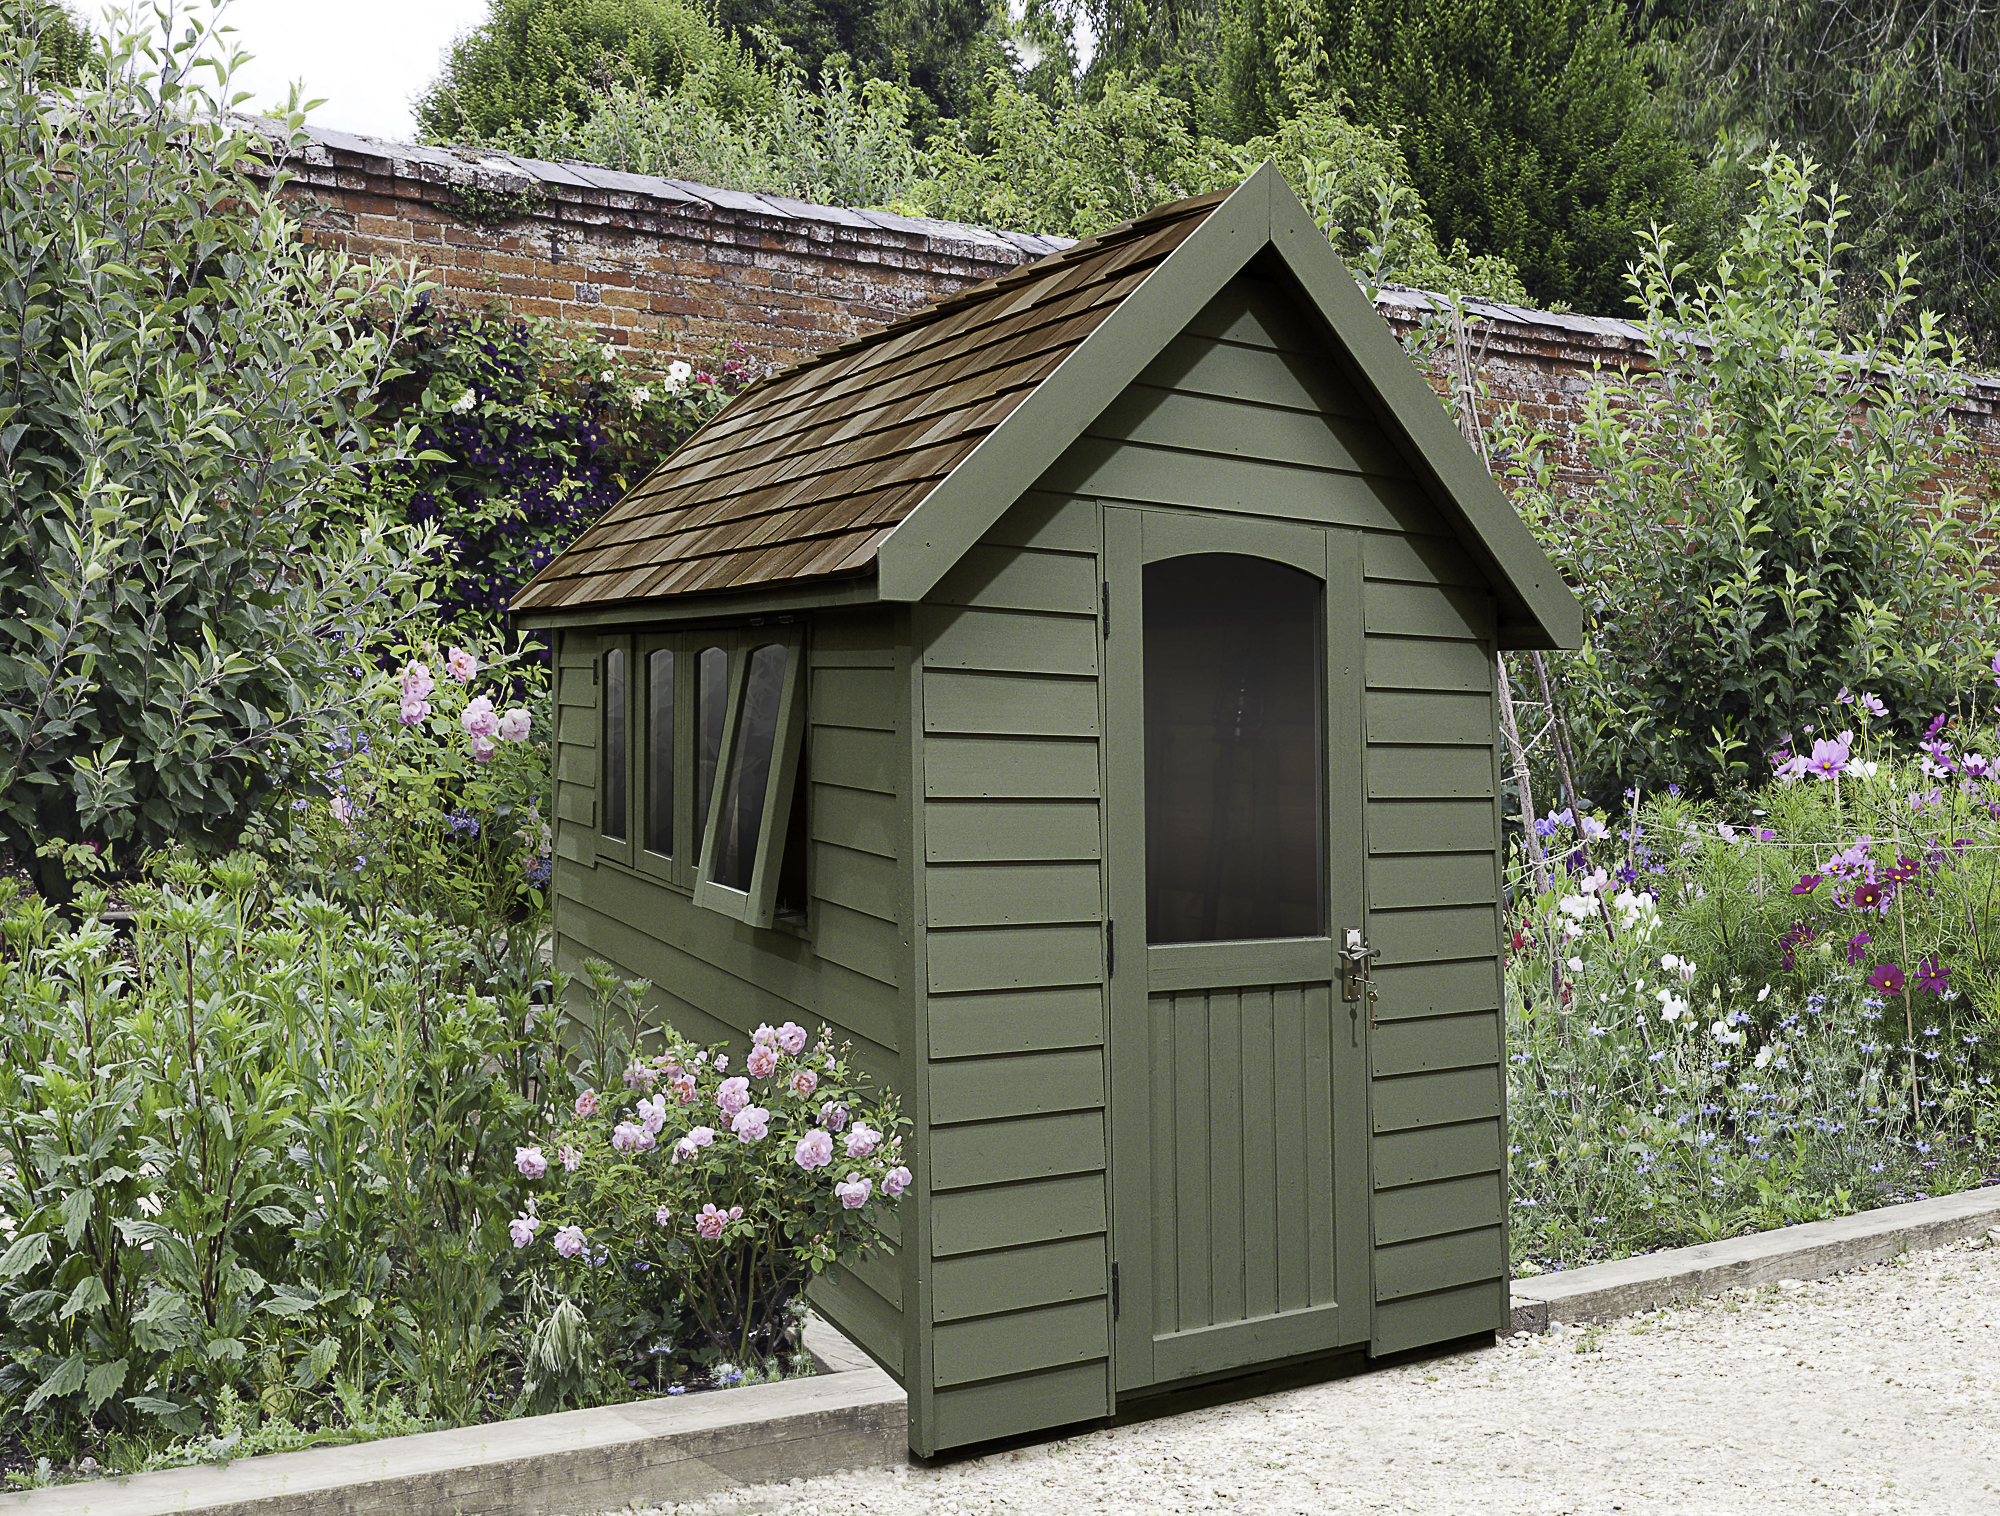 Forest Garden Apex Redwood Overlap Forest Retreat Shed Green with Assembly - 8 x 5ft